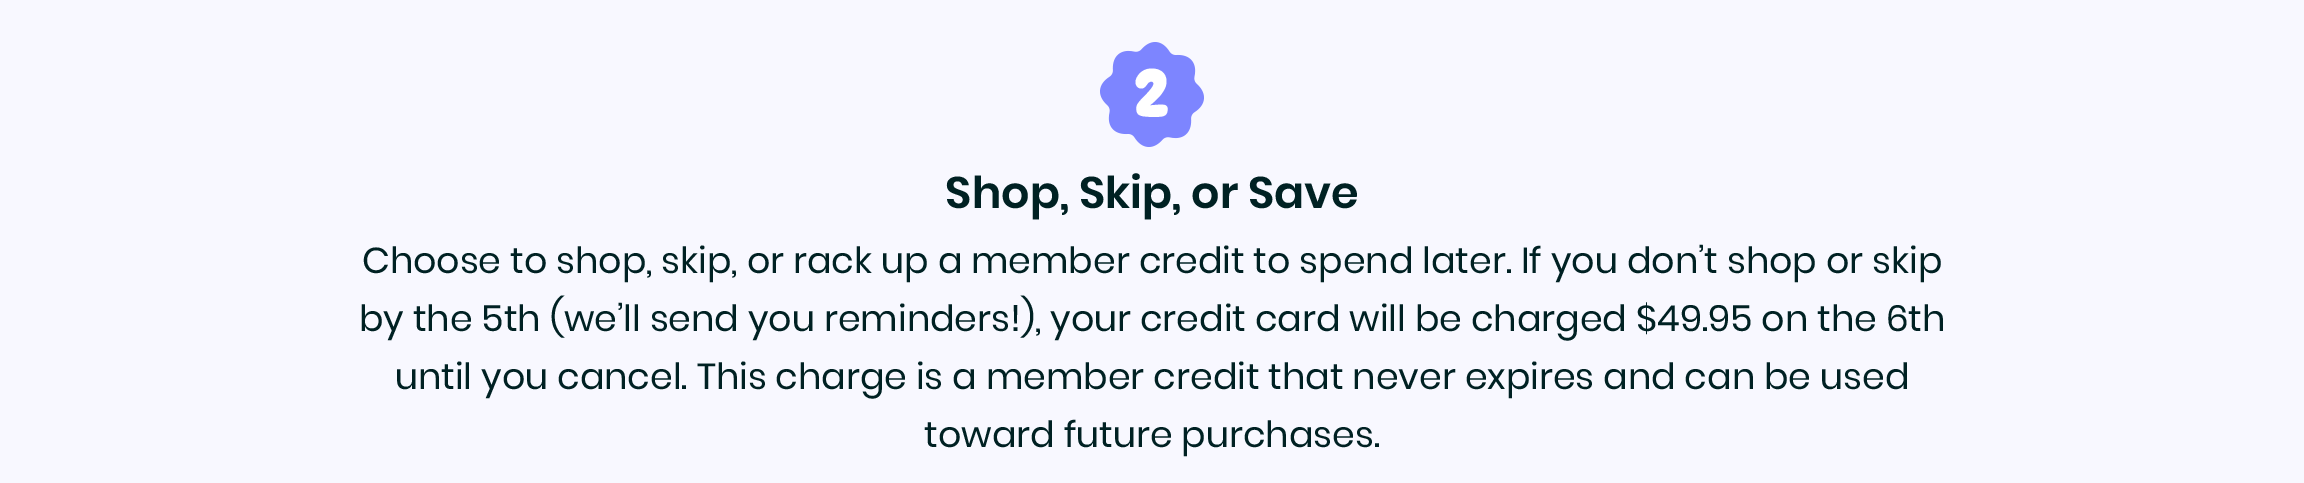 2. Shop, skip or save - Choose to shop, skip or rack up a member credit to spend later.  If you don't shop or skip by the 5th (we'll send you reminders!), your credit card will be charged $49.95 on the 6th until you cancel. This charge is a member credit that never expires and can be used toward future purchases.